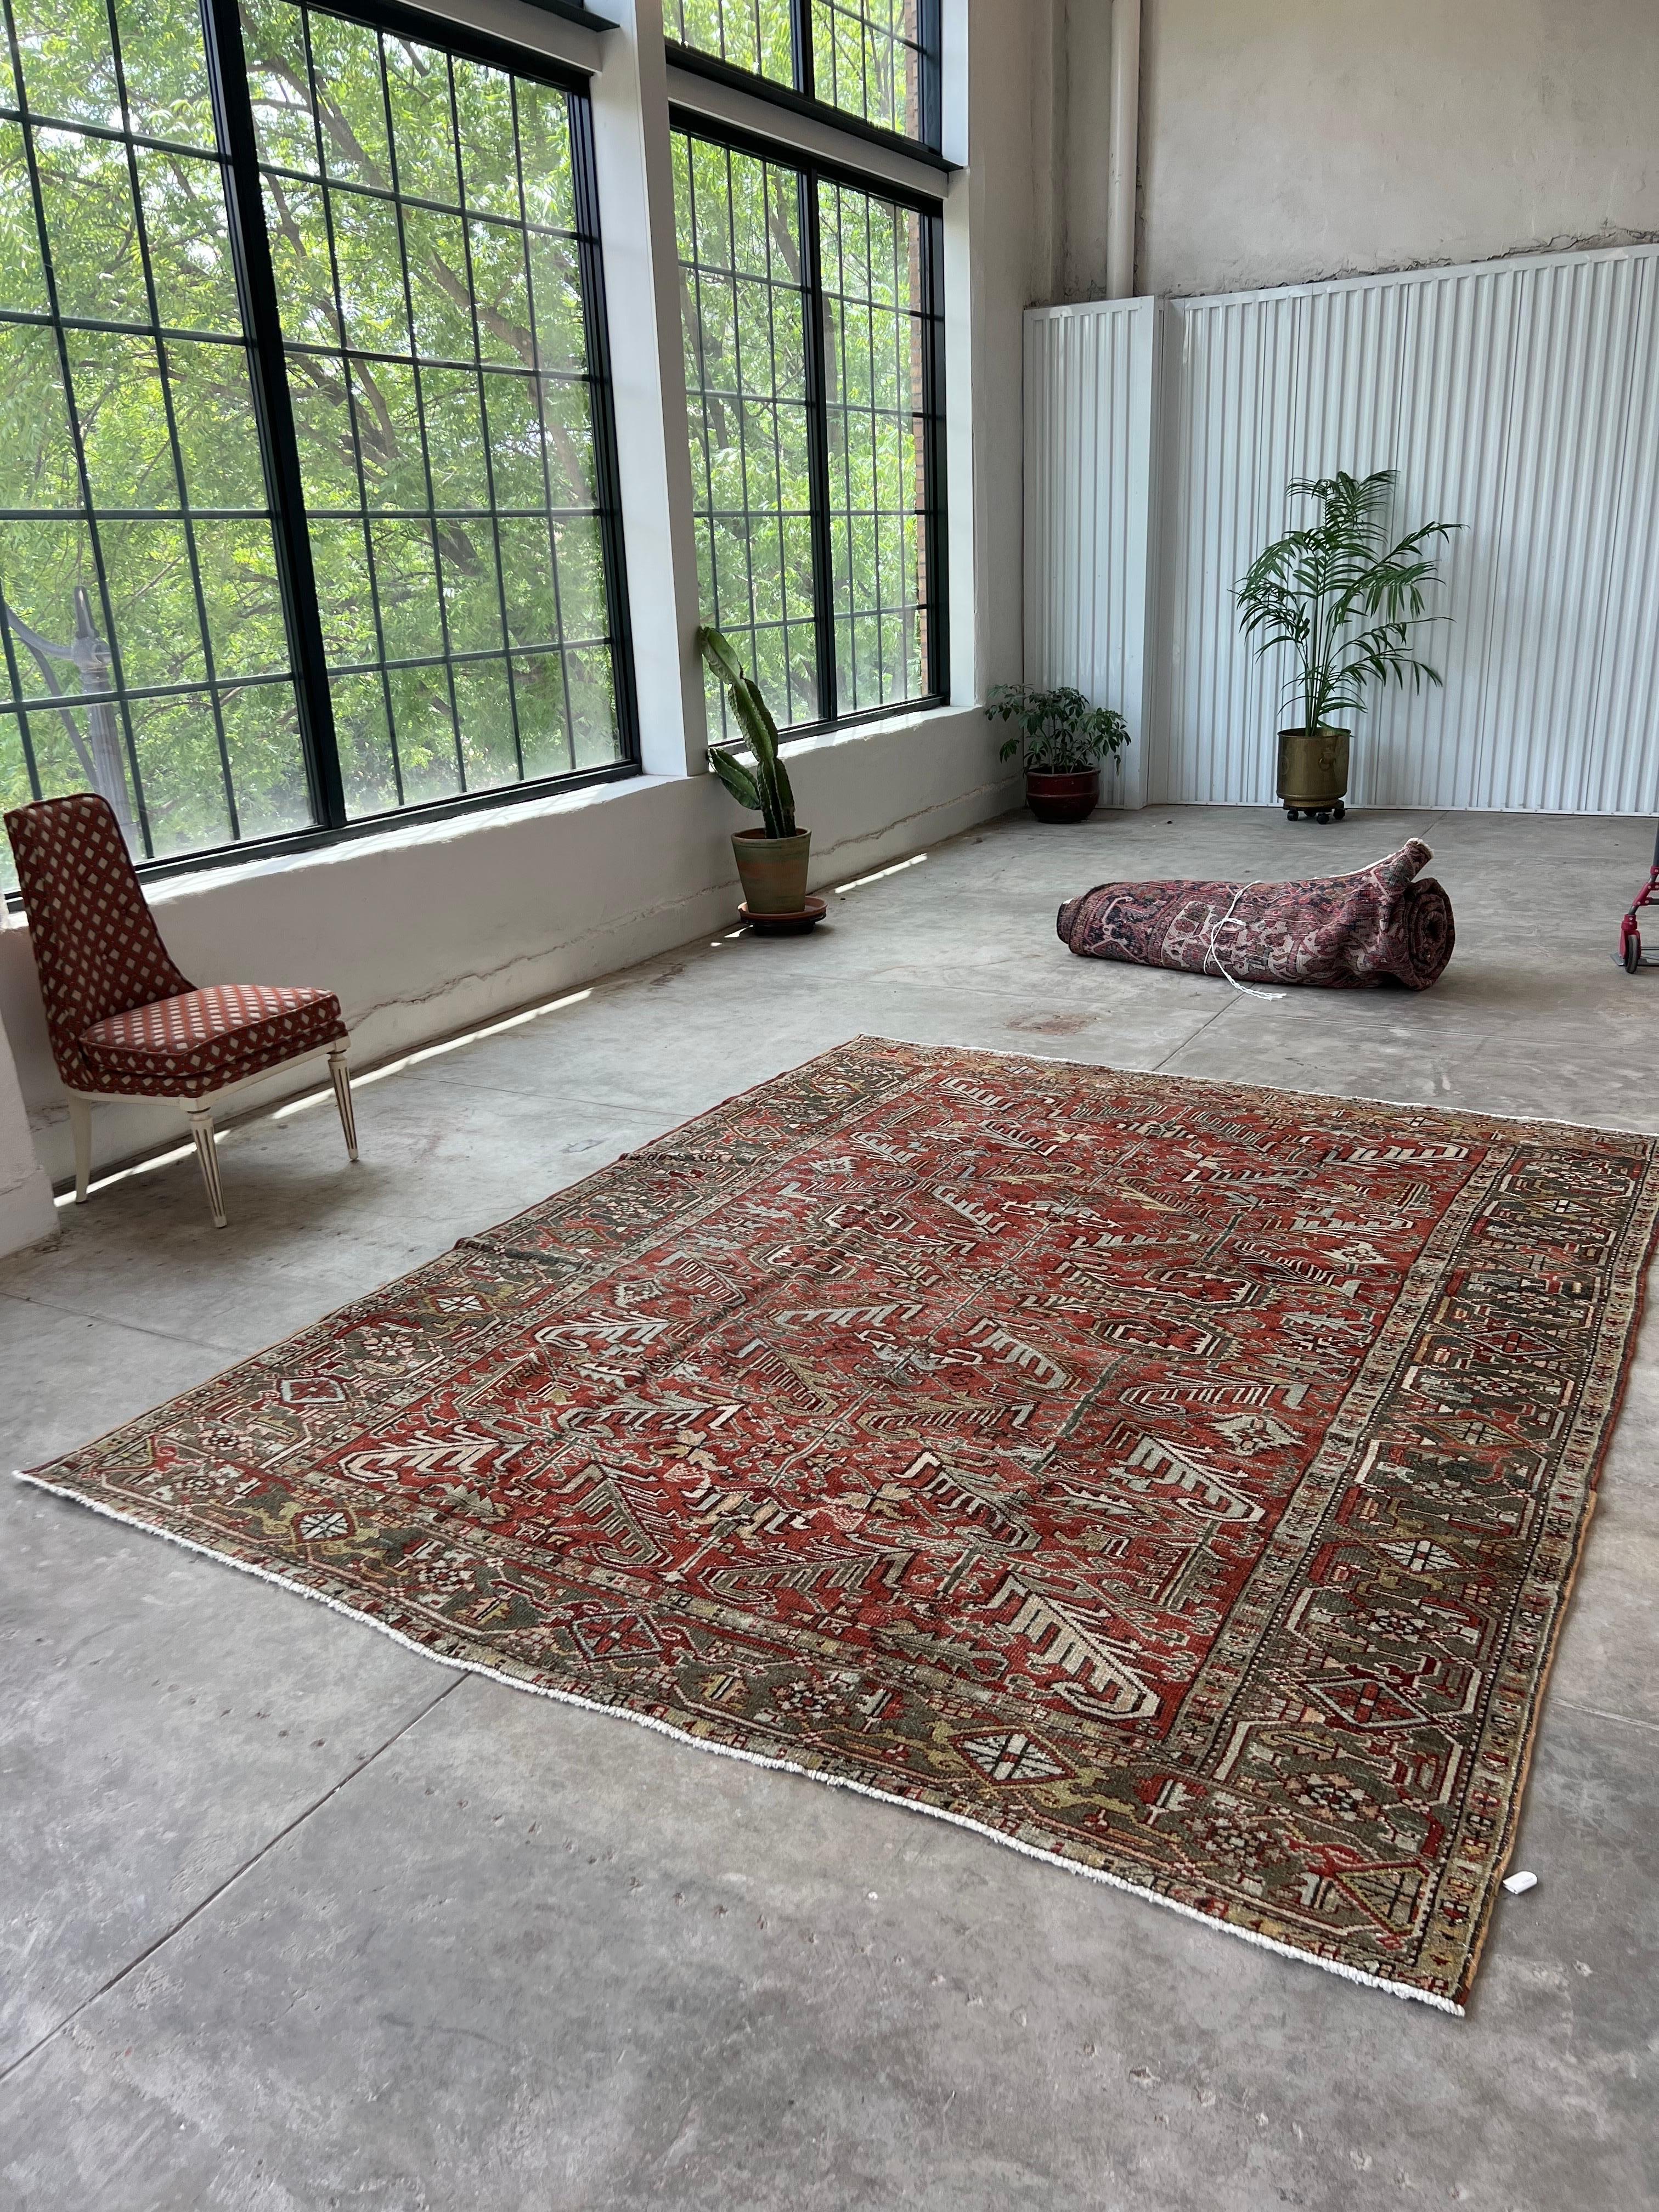 7’6 x 9’6

Beautiful vintage Persian Heriz rug with an all over pattern. The sage blue/green border is wonderful! Hand-knotted wool rugs have a light side and dark side depending on which direction you're viewing the nap of the wool yarn! This rug